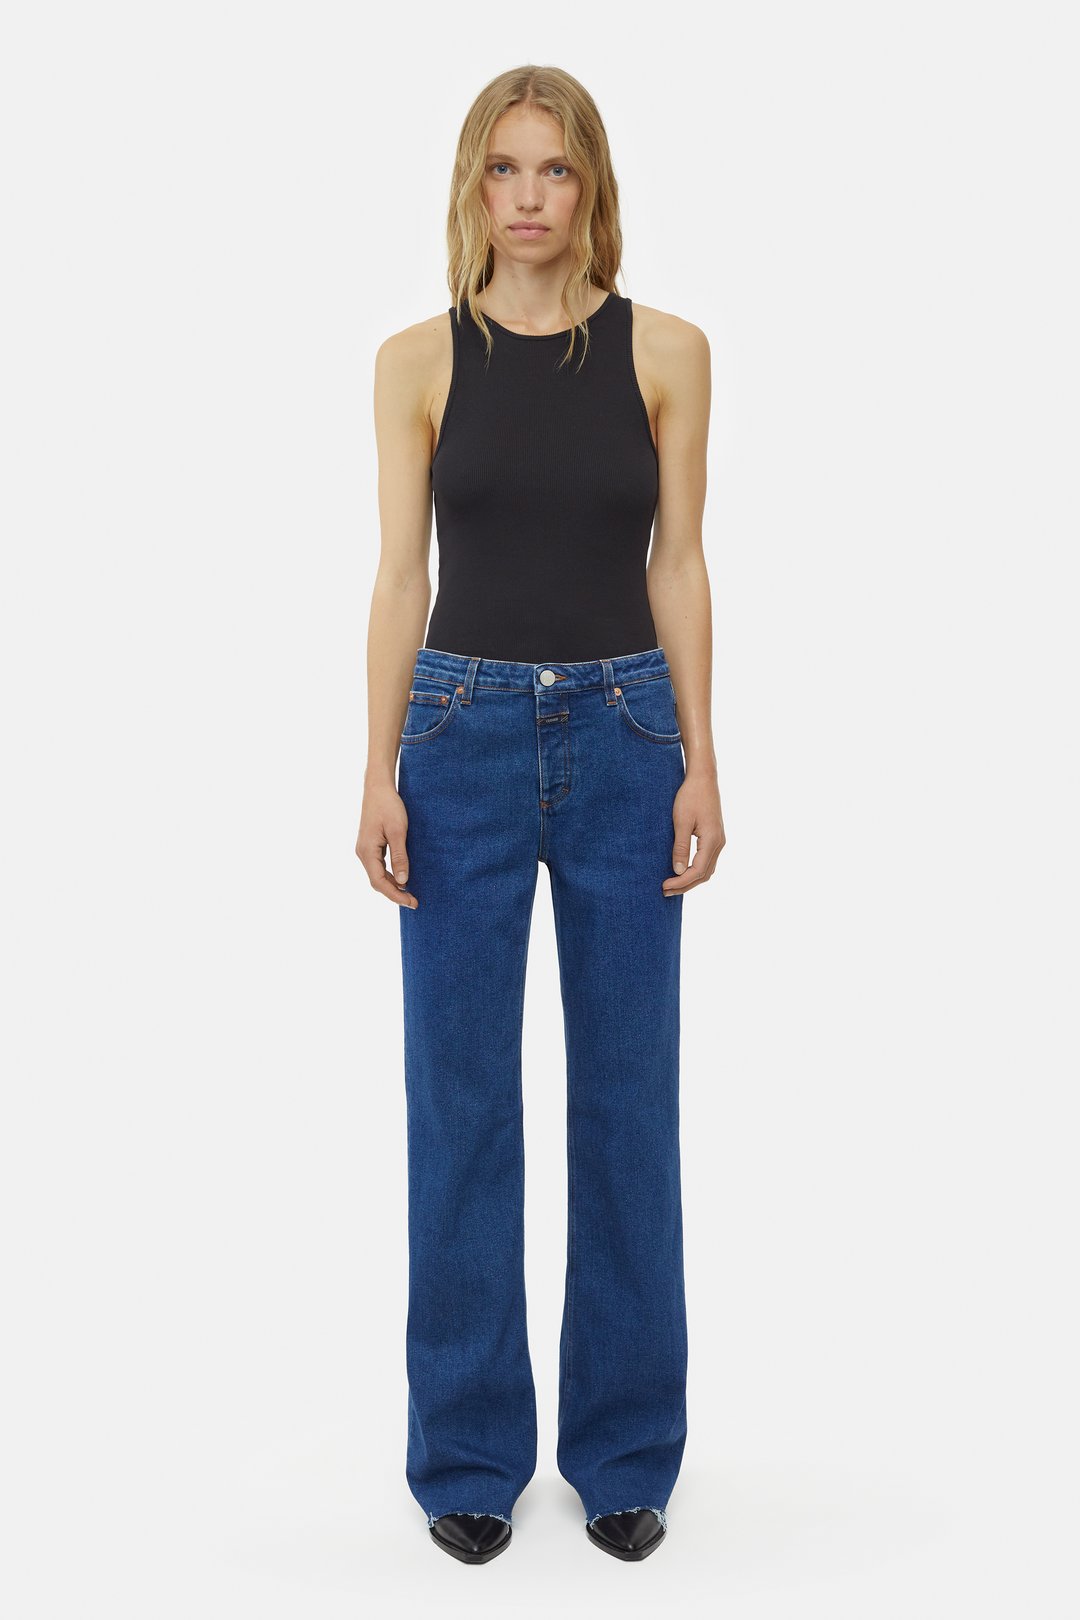 CLOSED STYLE NAME SLIM - | GILLAN JEANS